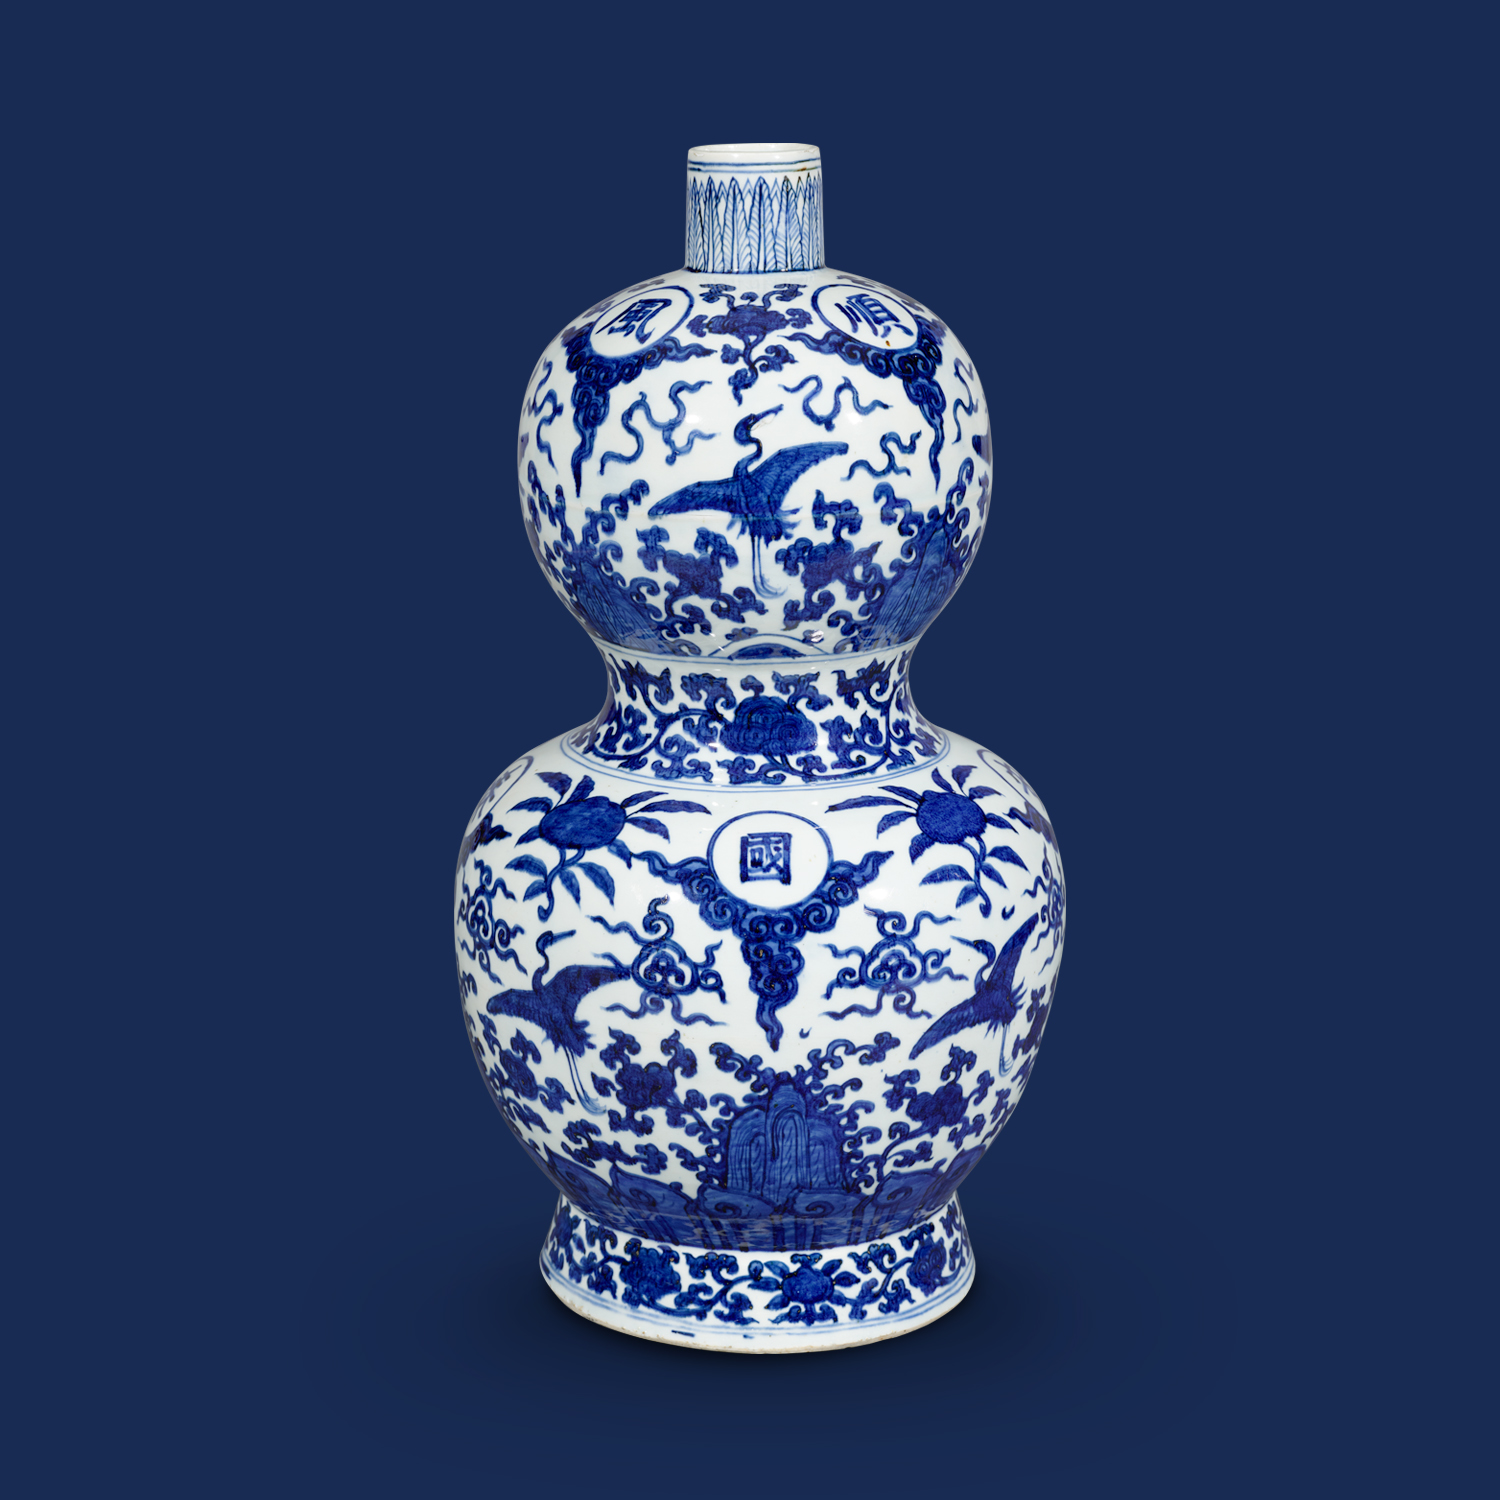 Double-gourd vase inscribed with <i>fengtiao yushun guotai min'an</i> blessings in underglaze blue